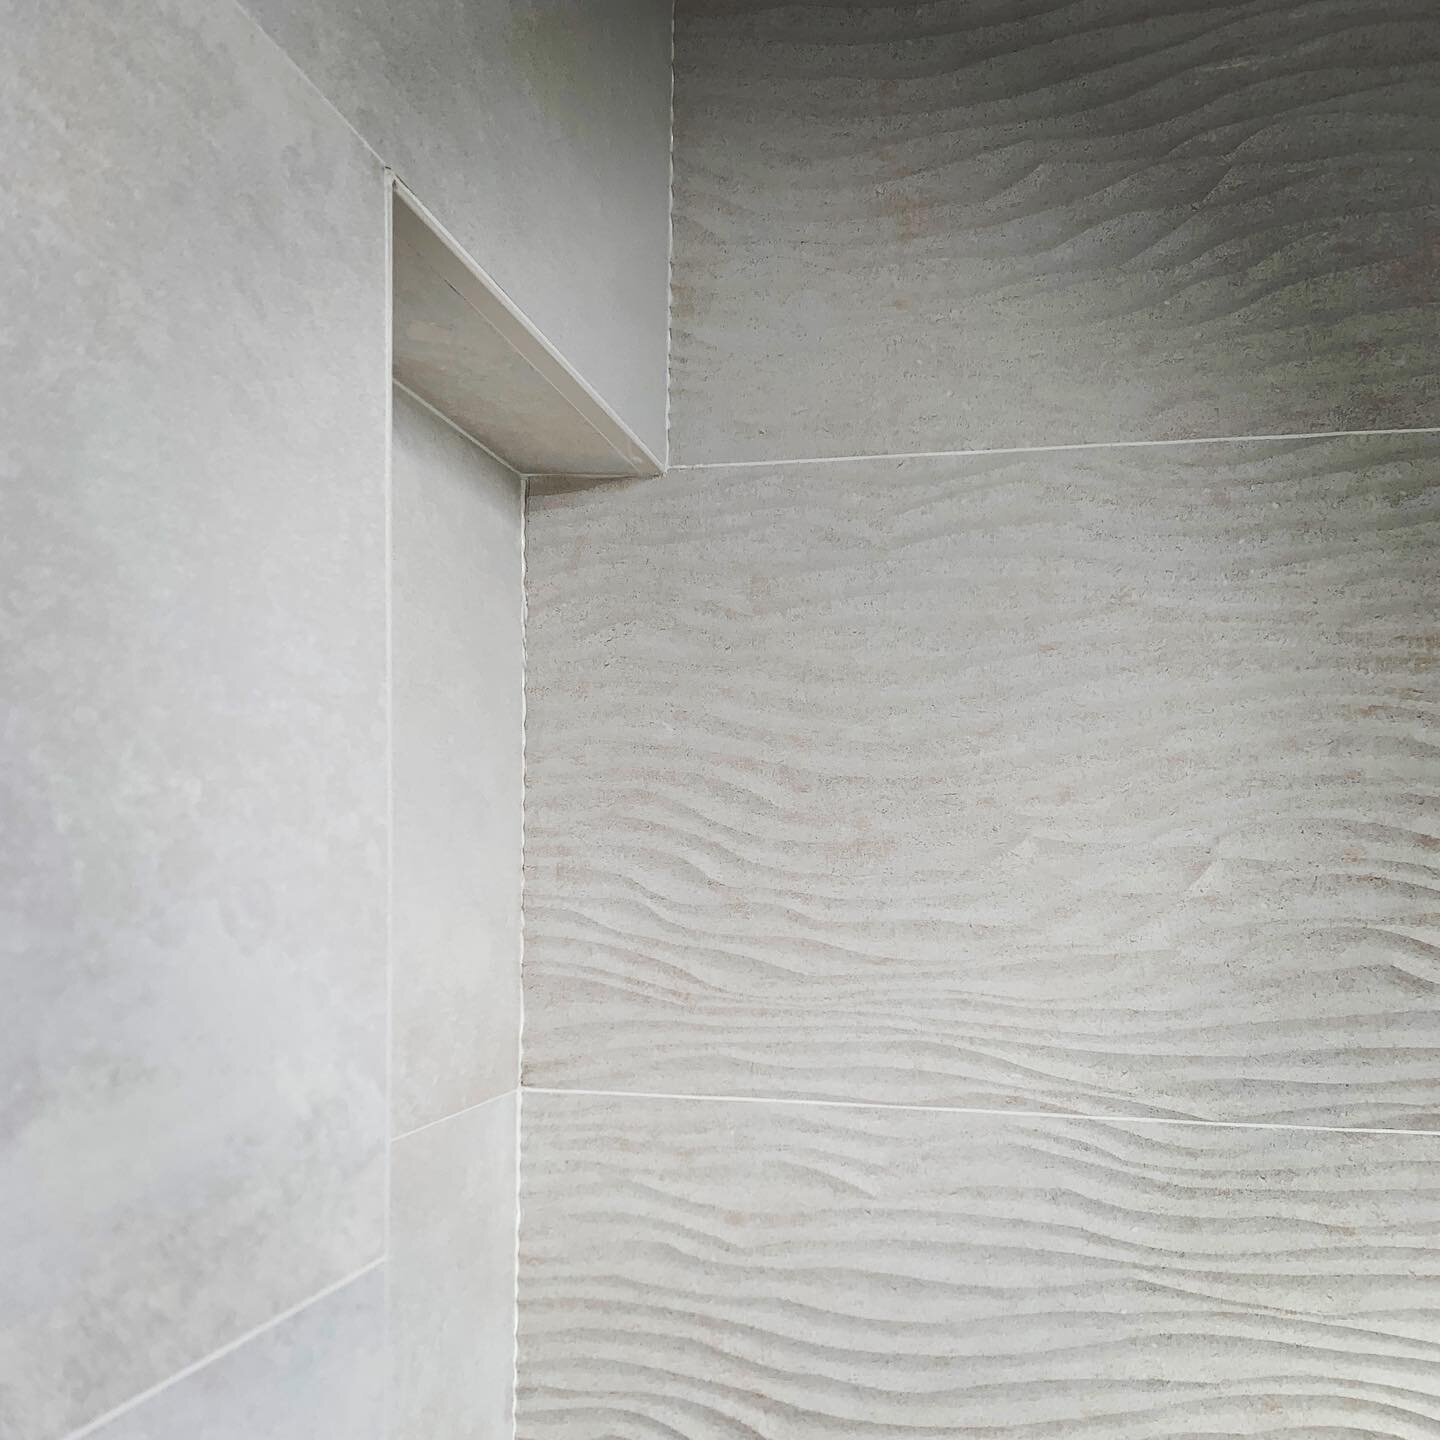 This @porcelanosa shower niche is awaiting glass shelves.  The movement on this tile is mesmerizing&mdash; making a statement without being too loud and so apropos for this coastal home.